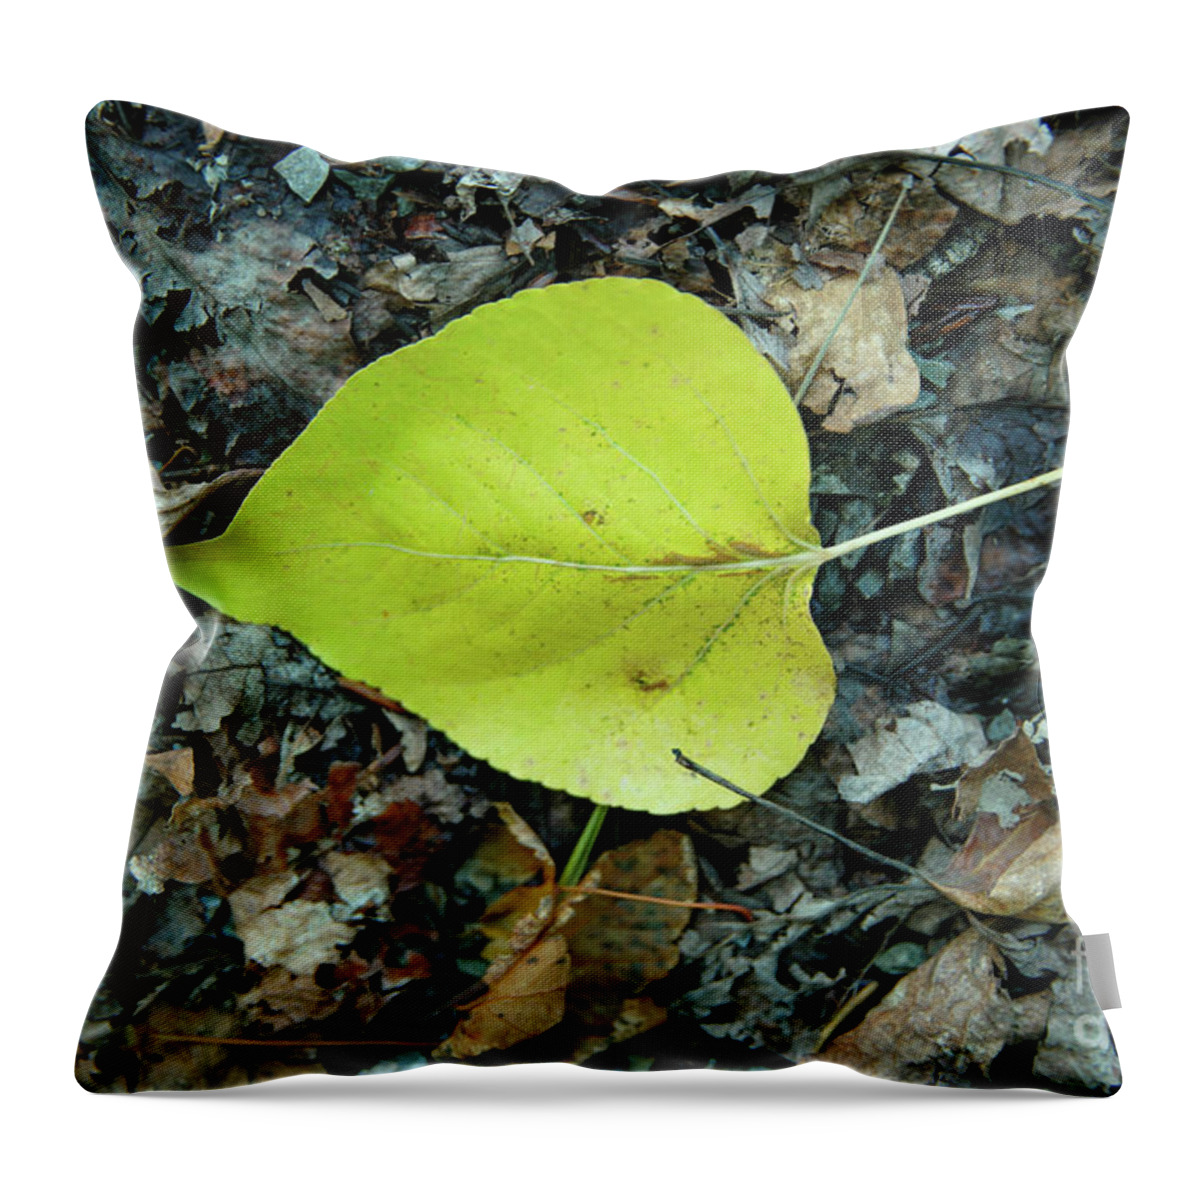 Leaf Throw Pillow featuring the photograph A Leaf On The Ground by Jeff Swan